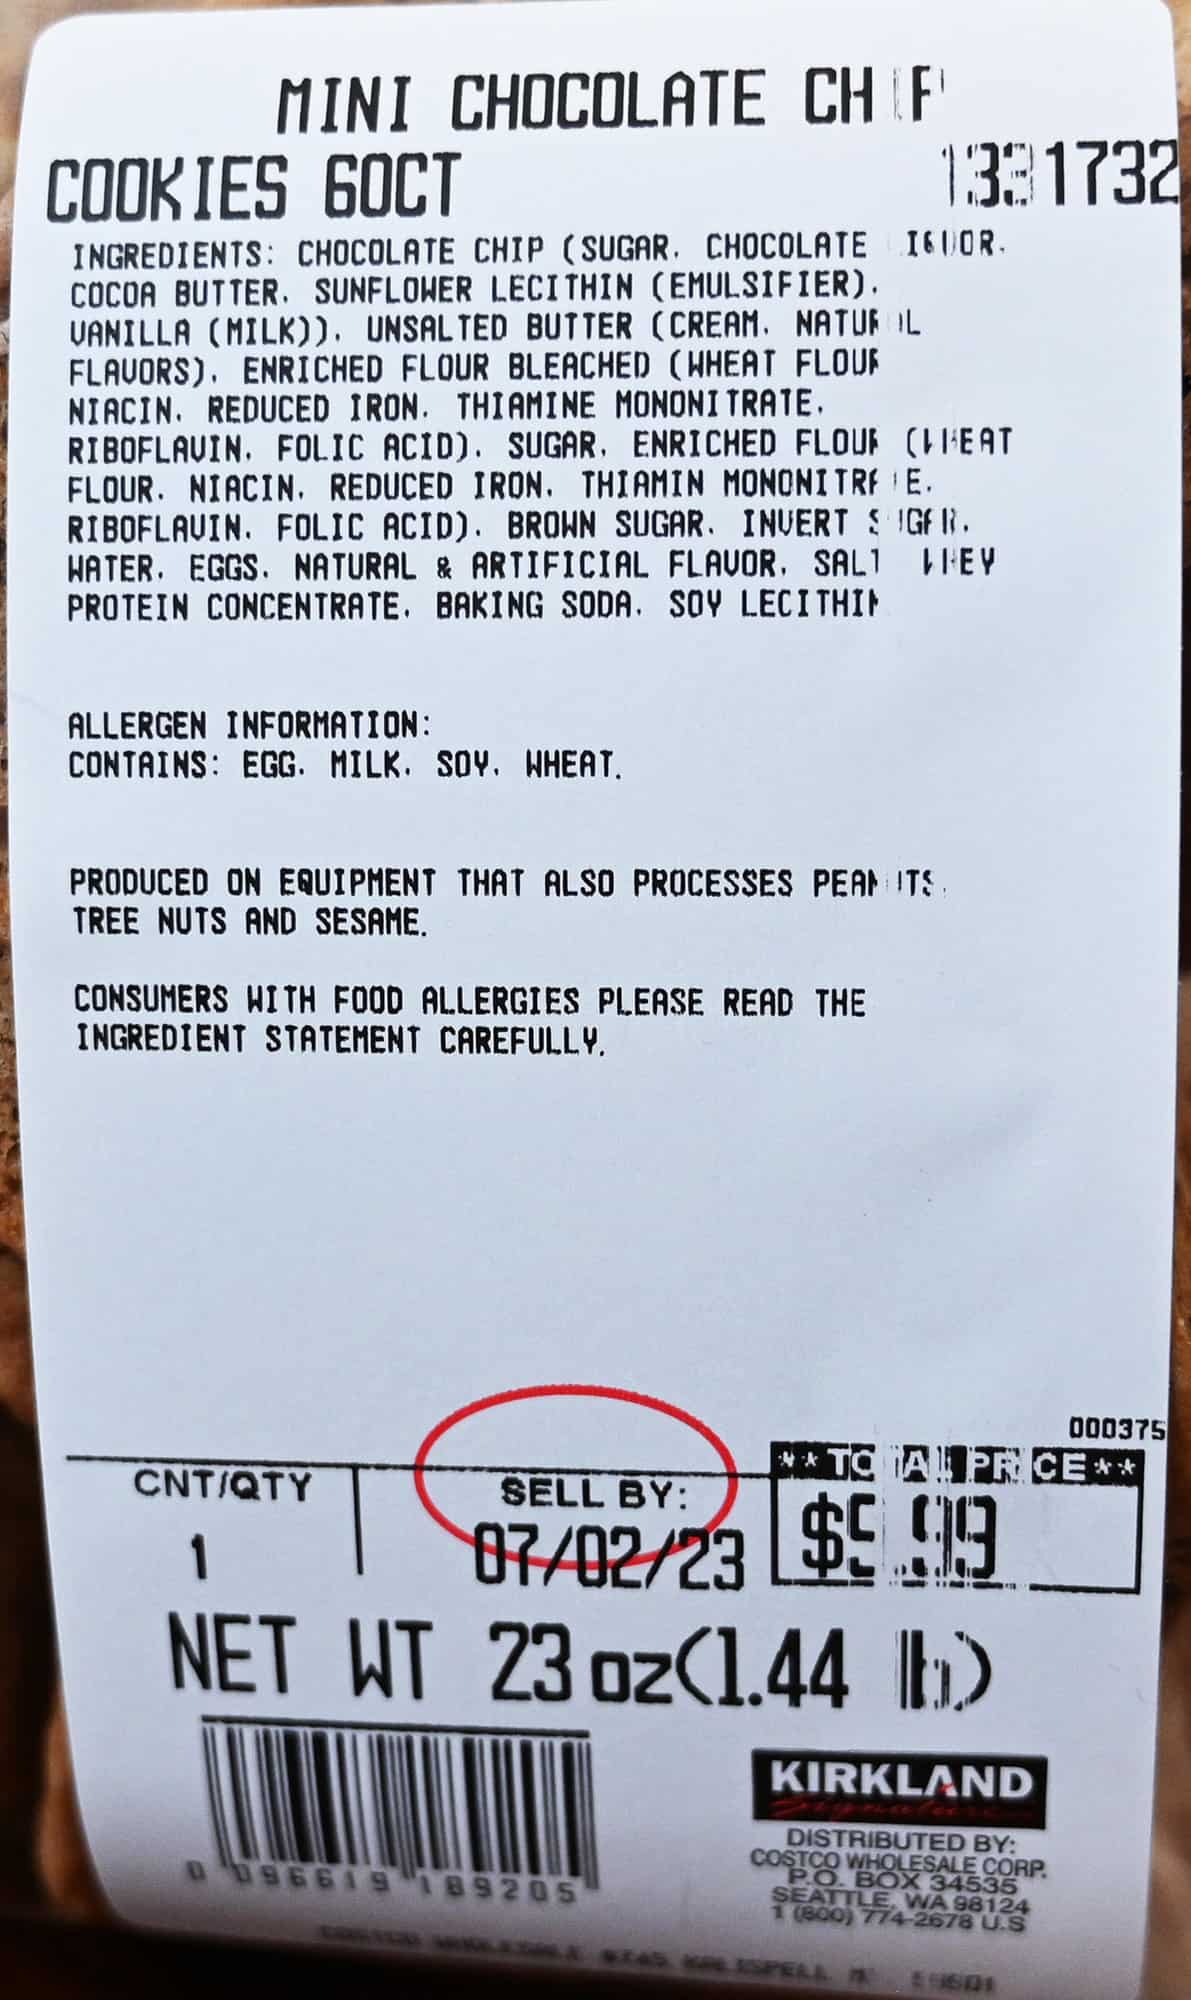 Closeup image of the full front label for the cookies showing cost, sell-by date, ingredients.